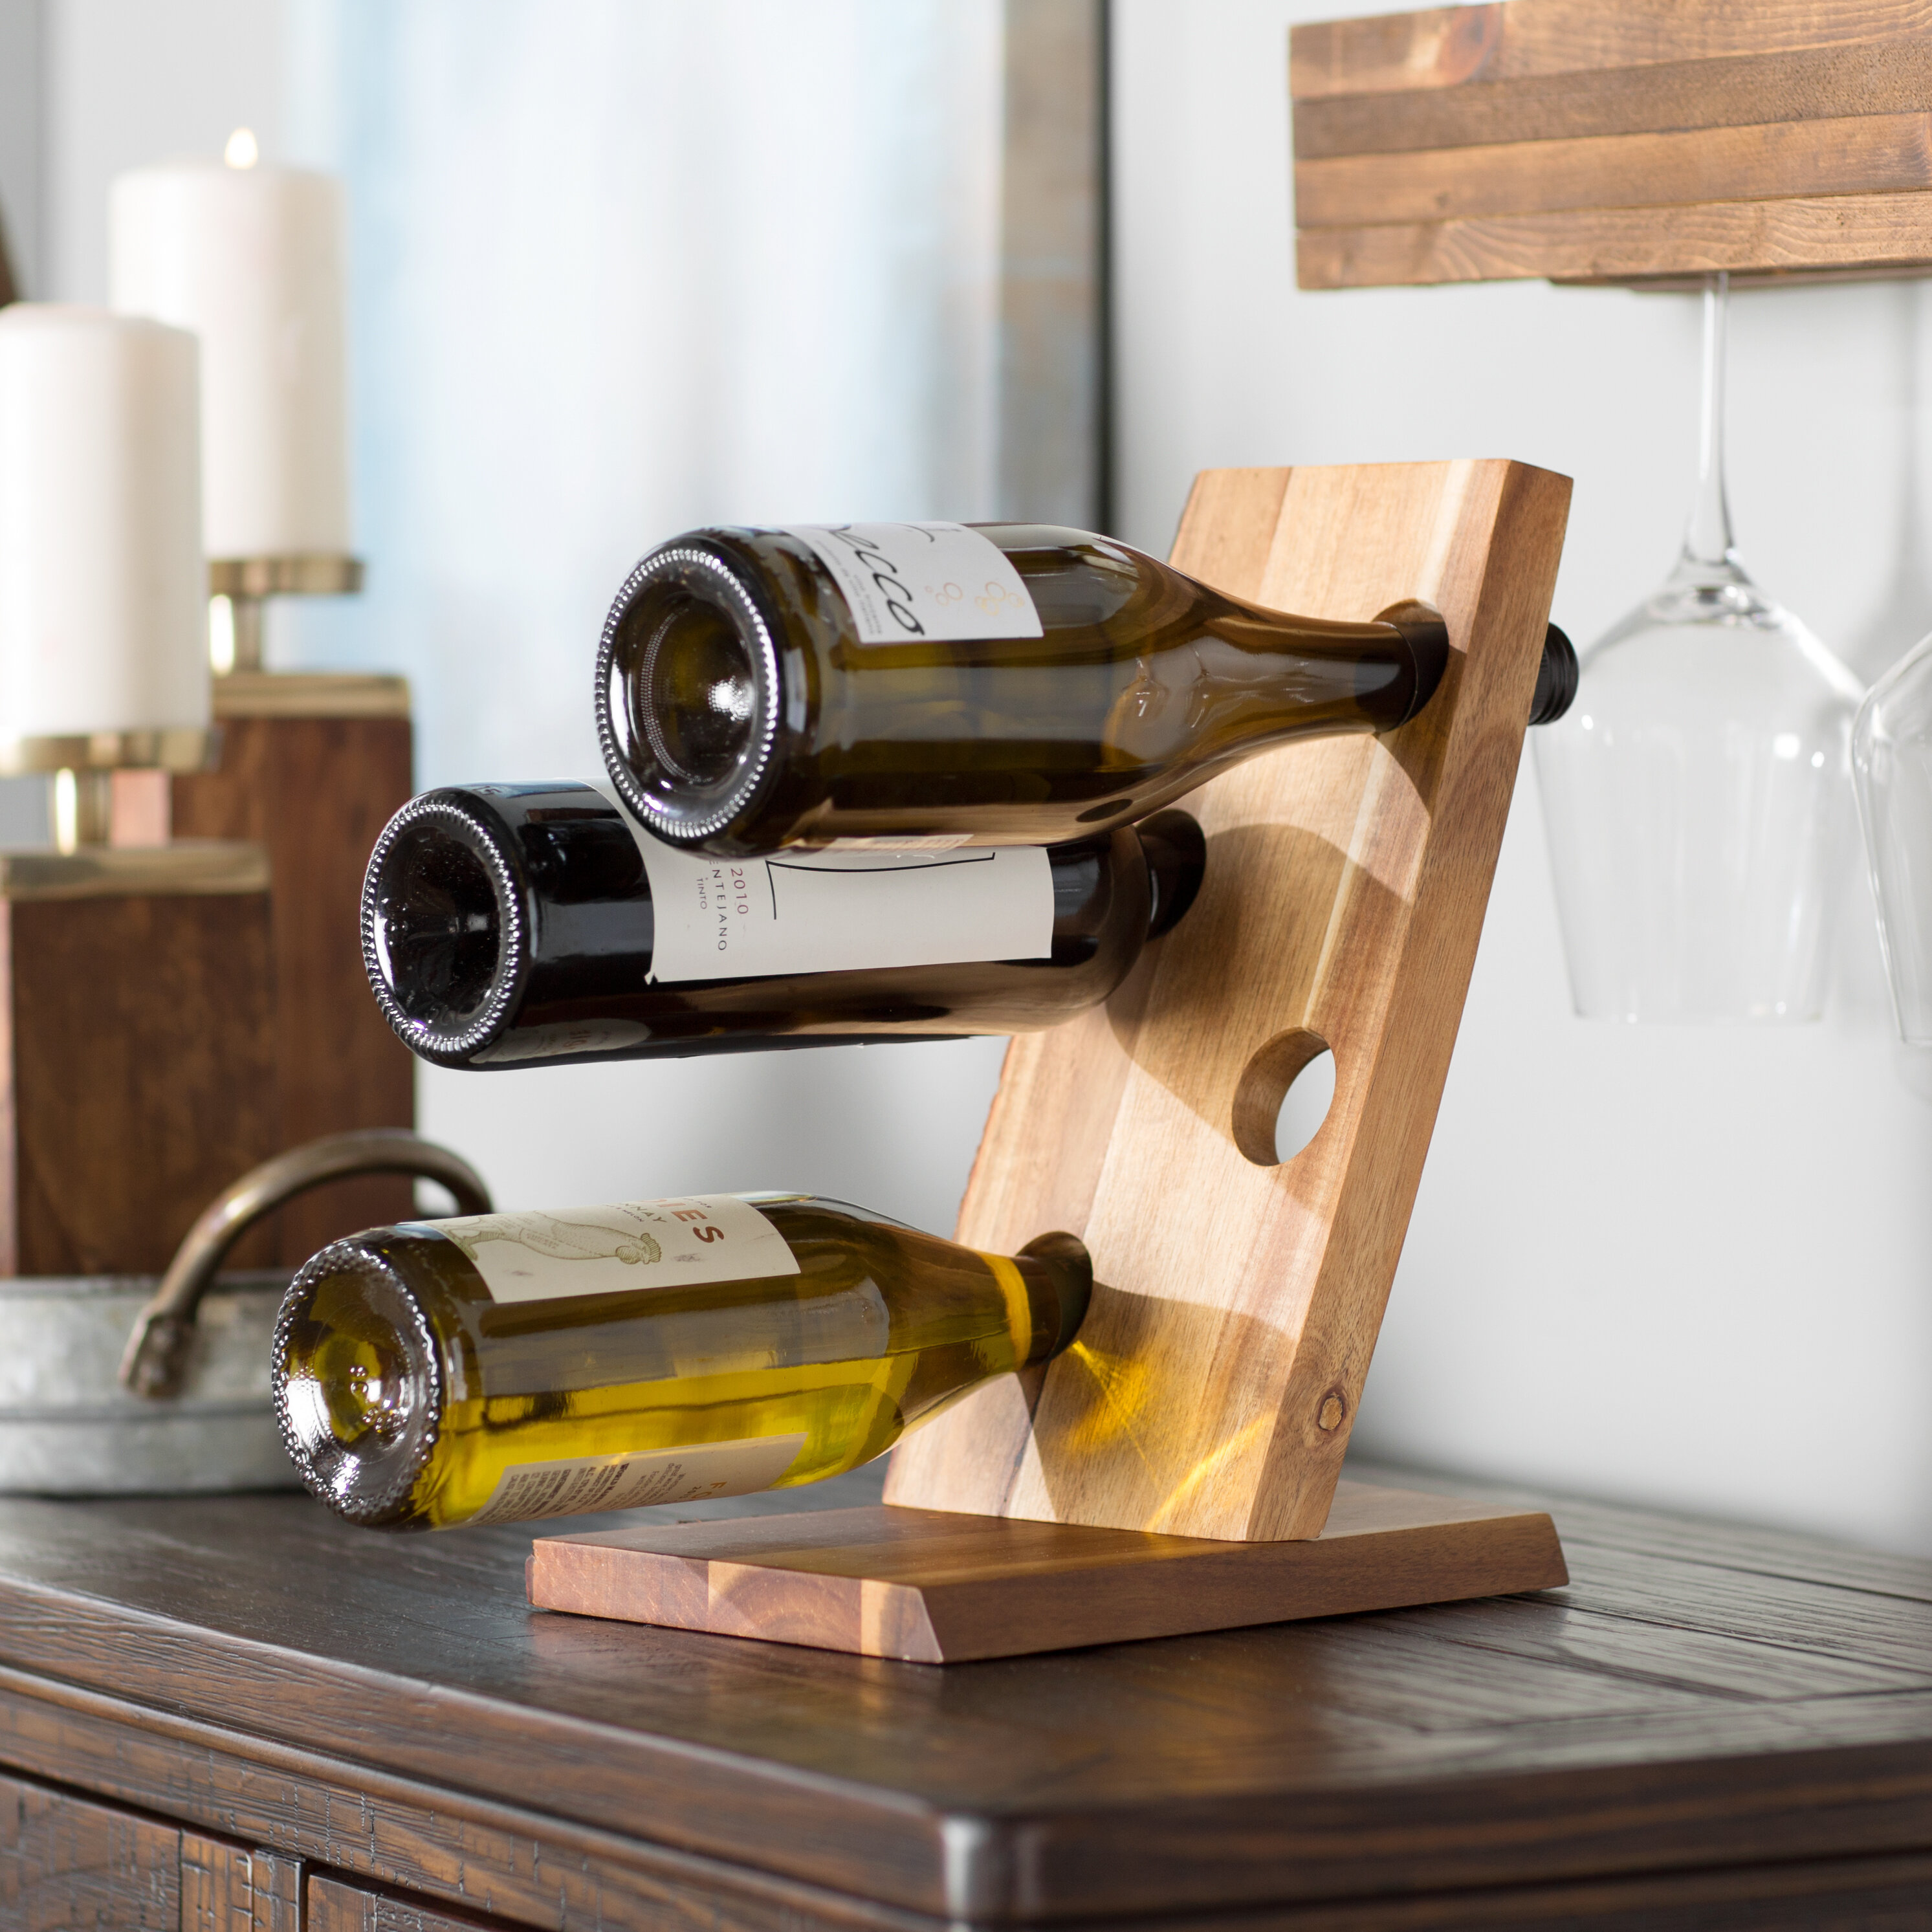 Classic Car Wine Bottle Holder Statue As Decorative Tabletop Wine Rack in Antique Look for Retro Automobile Collectors Bar Decorations and Rustic Bar Décor or Vintage Wine Lover Gifts for Men